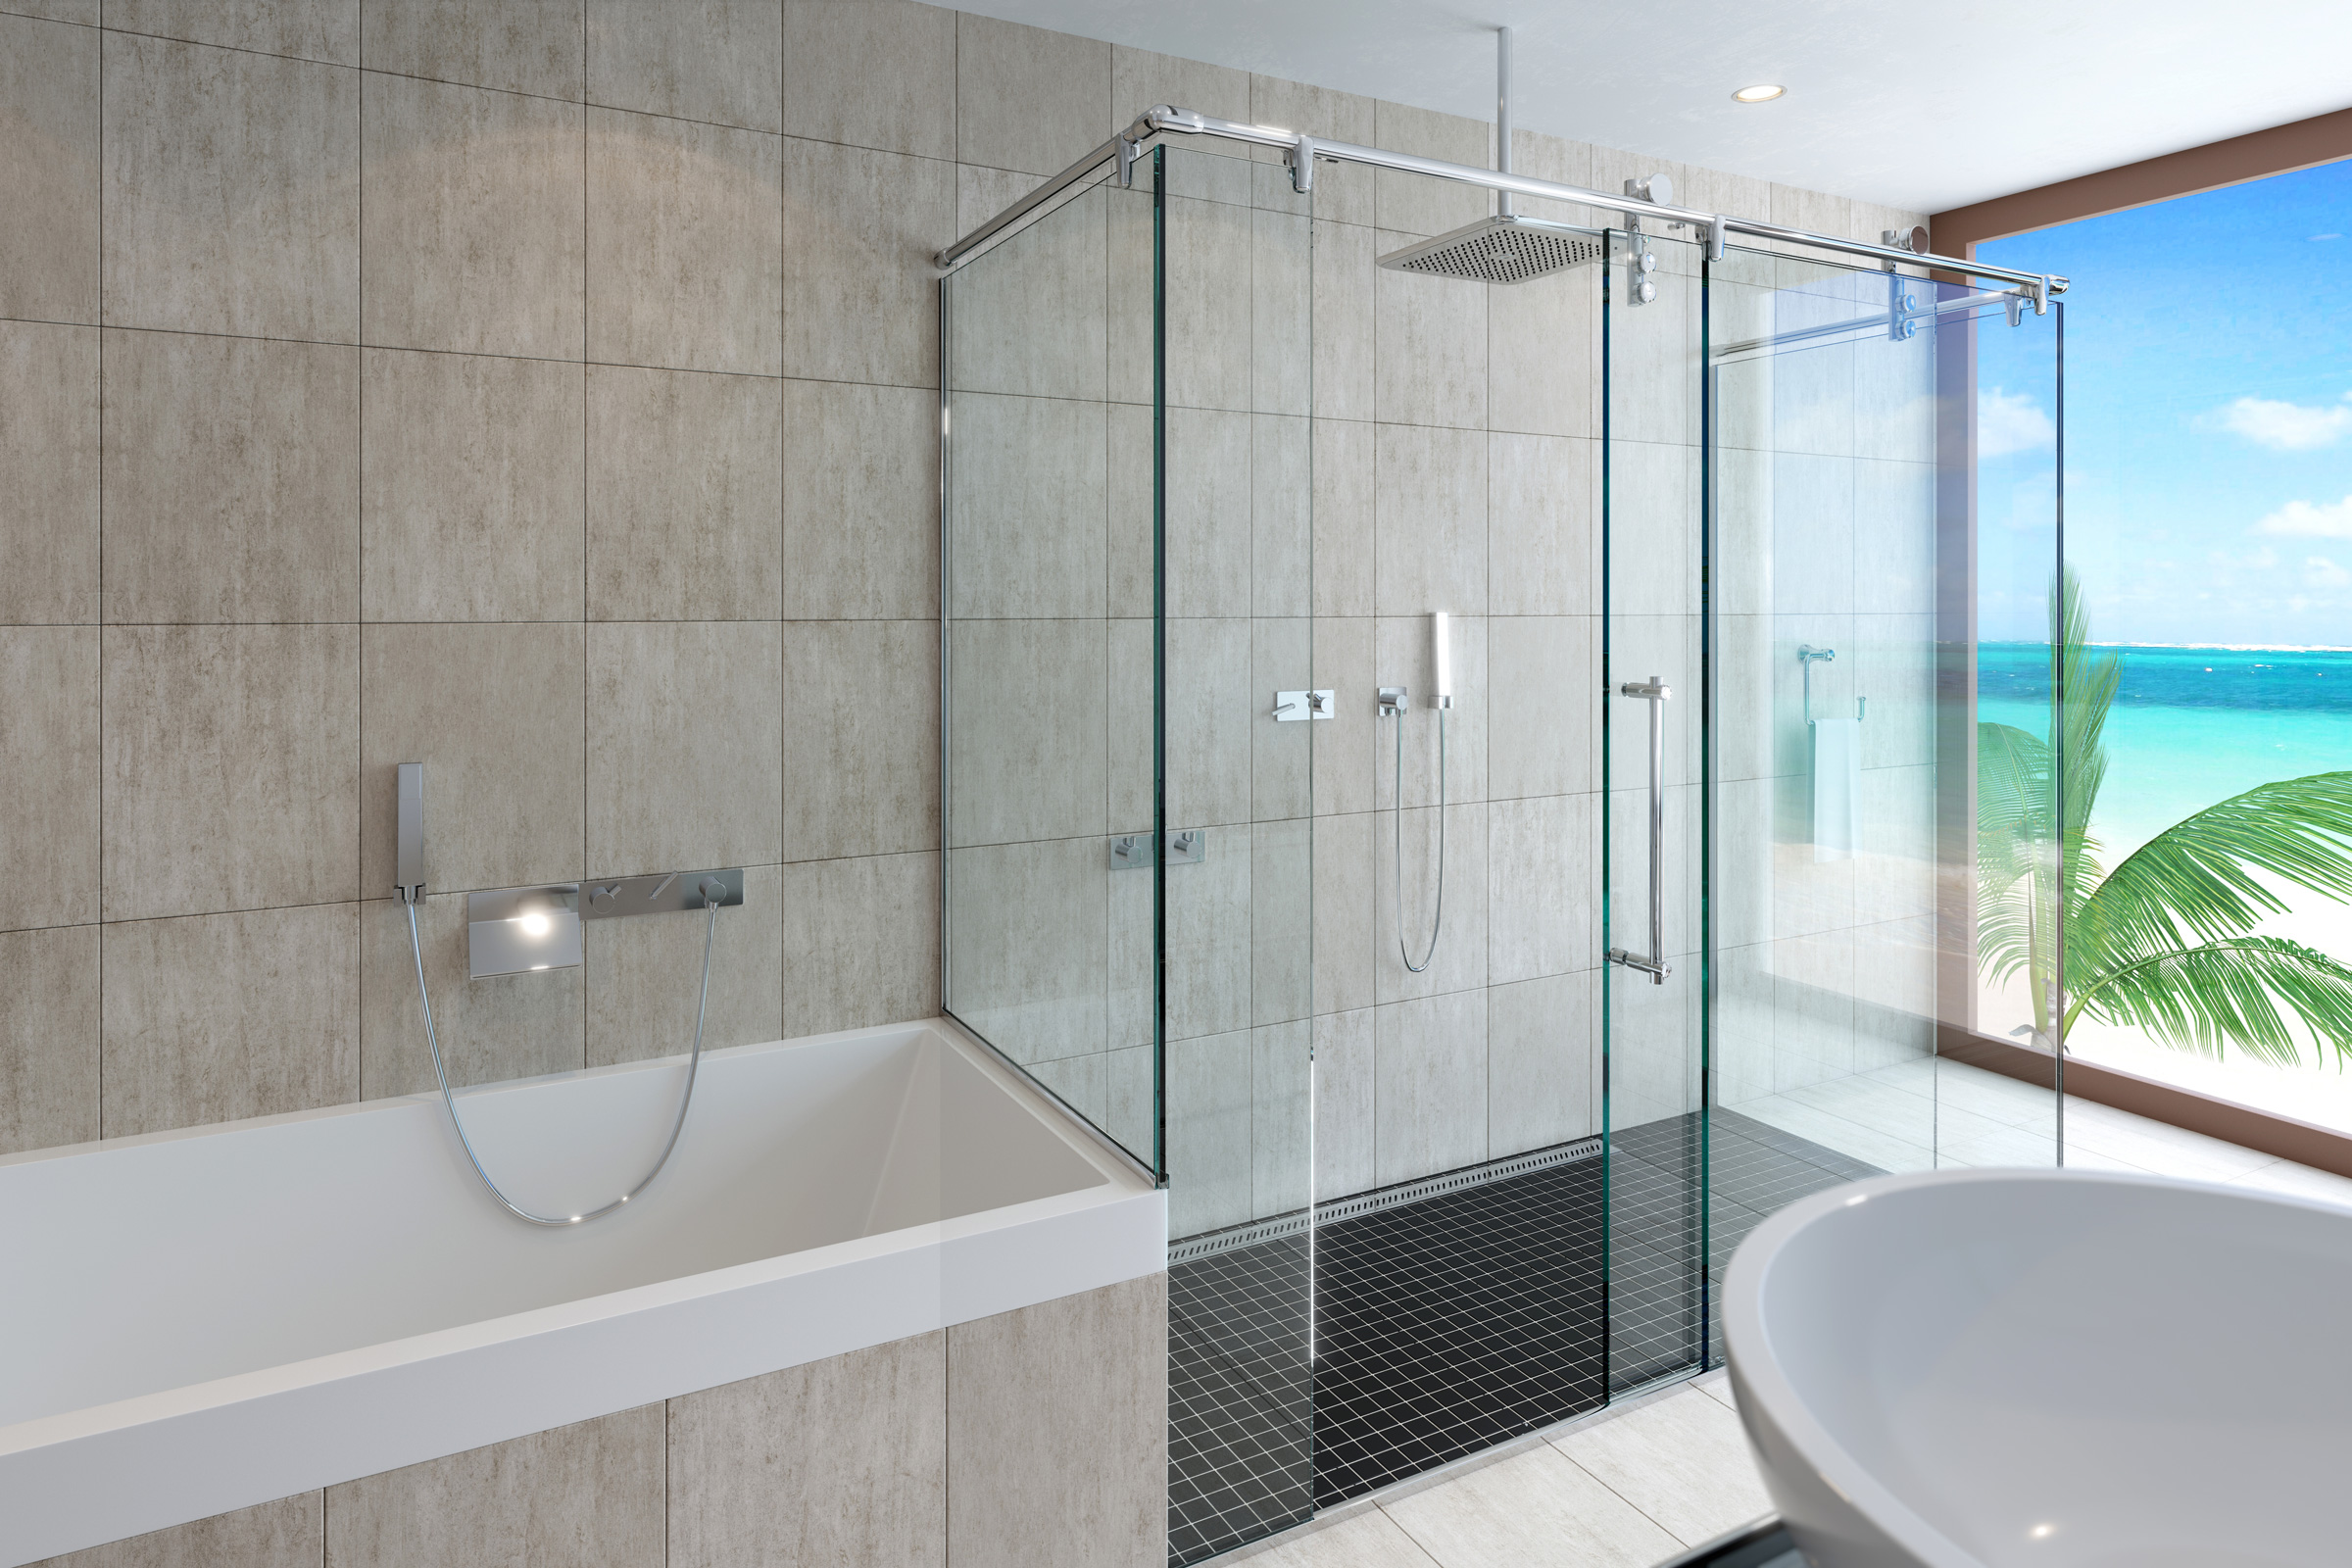 How to Care for Your Glass Shower Doors